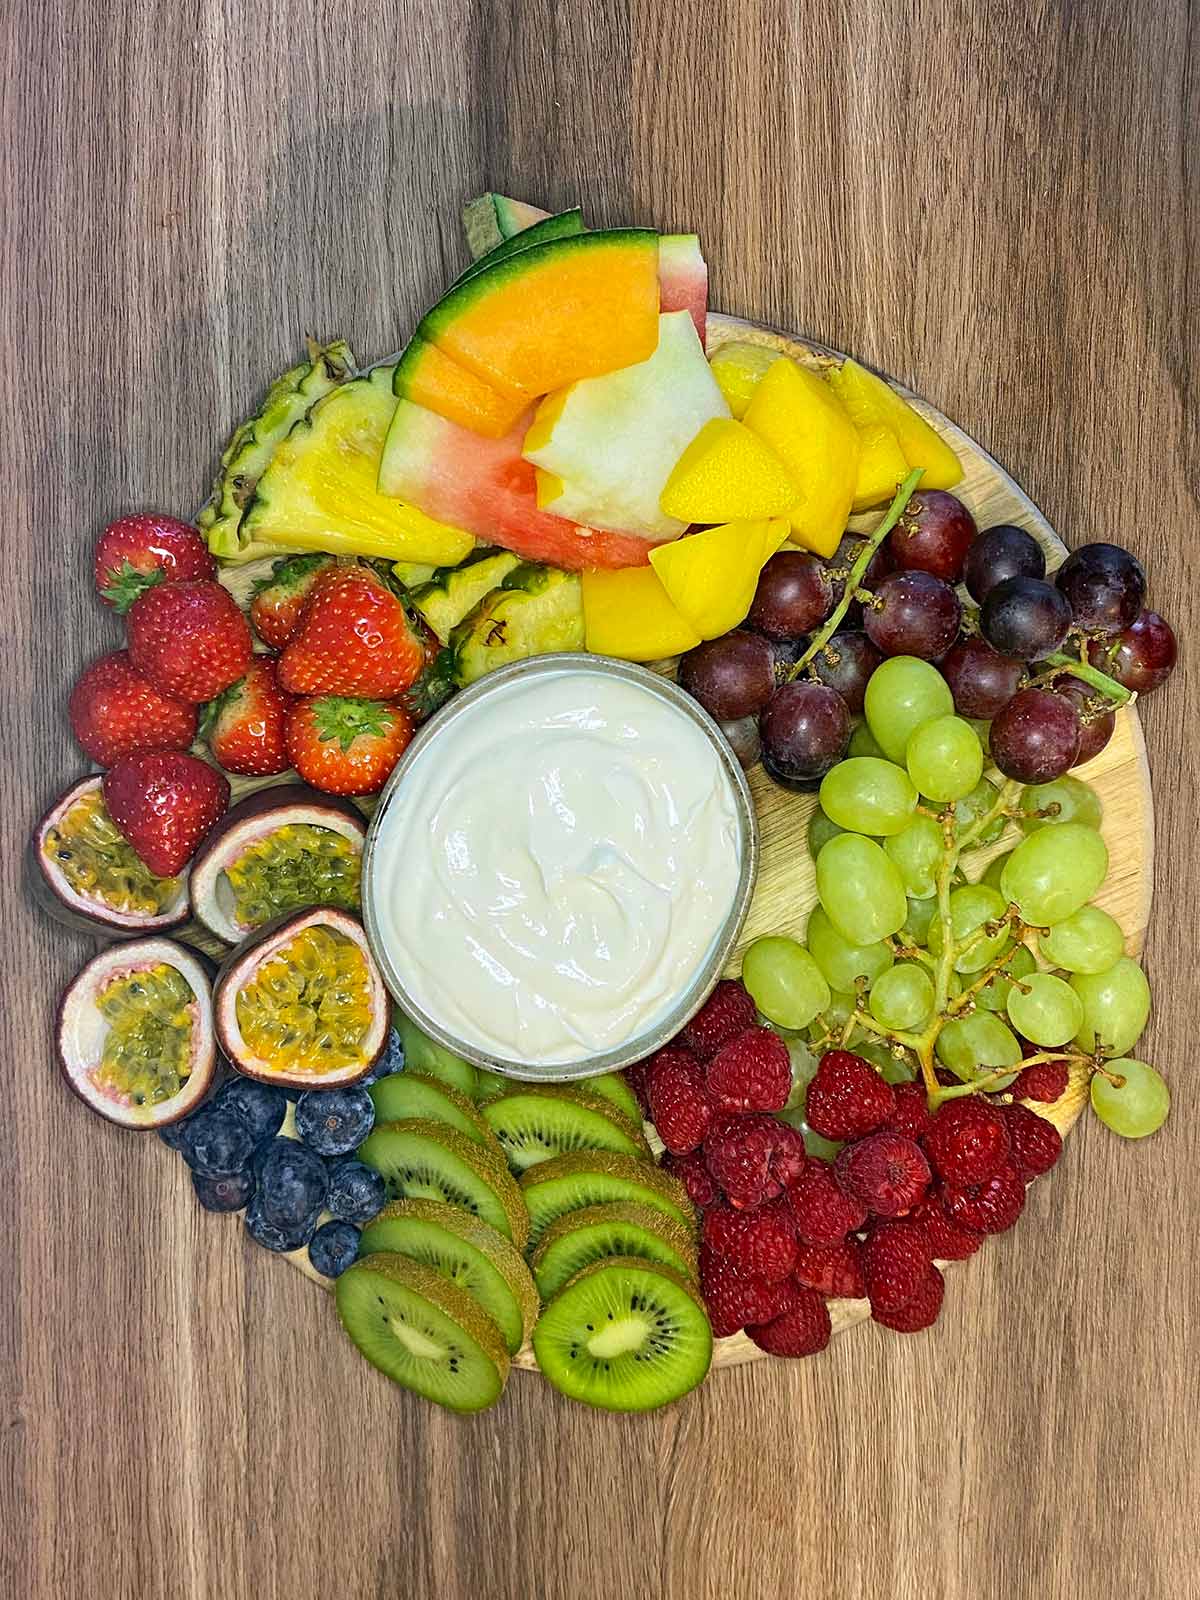 Various fruit added to the board surrounding the dip.